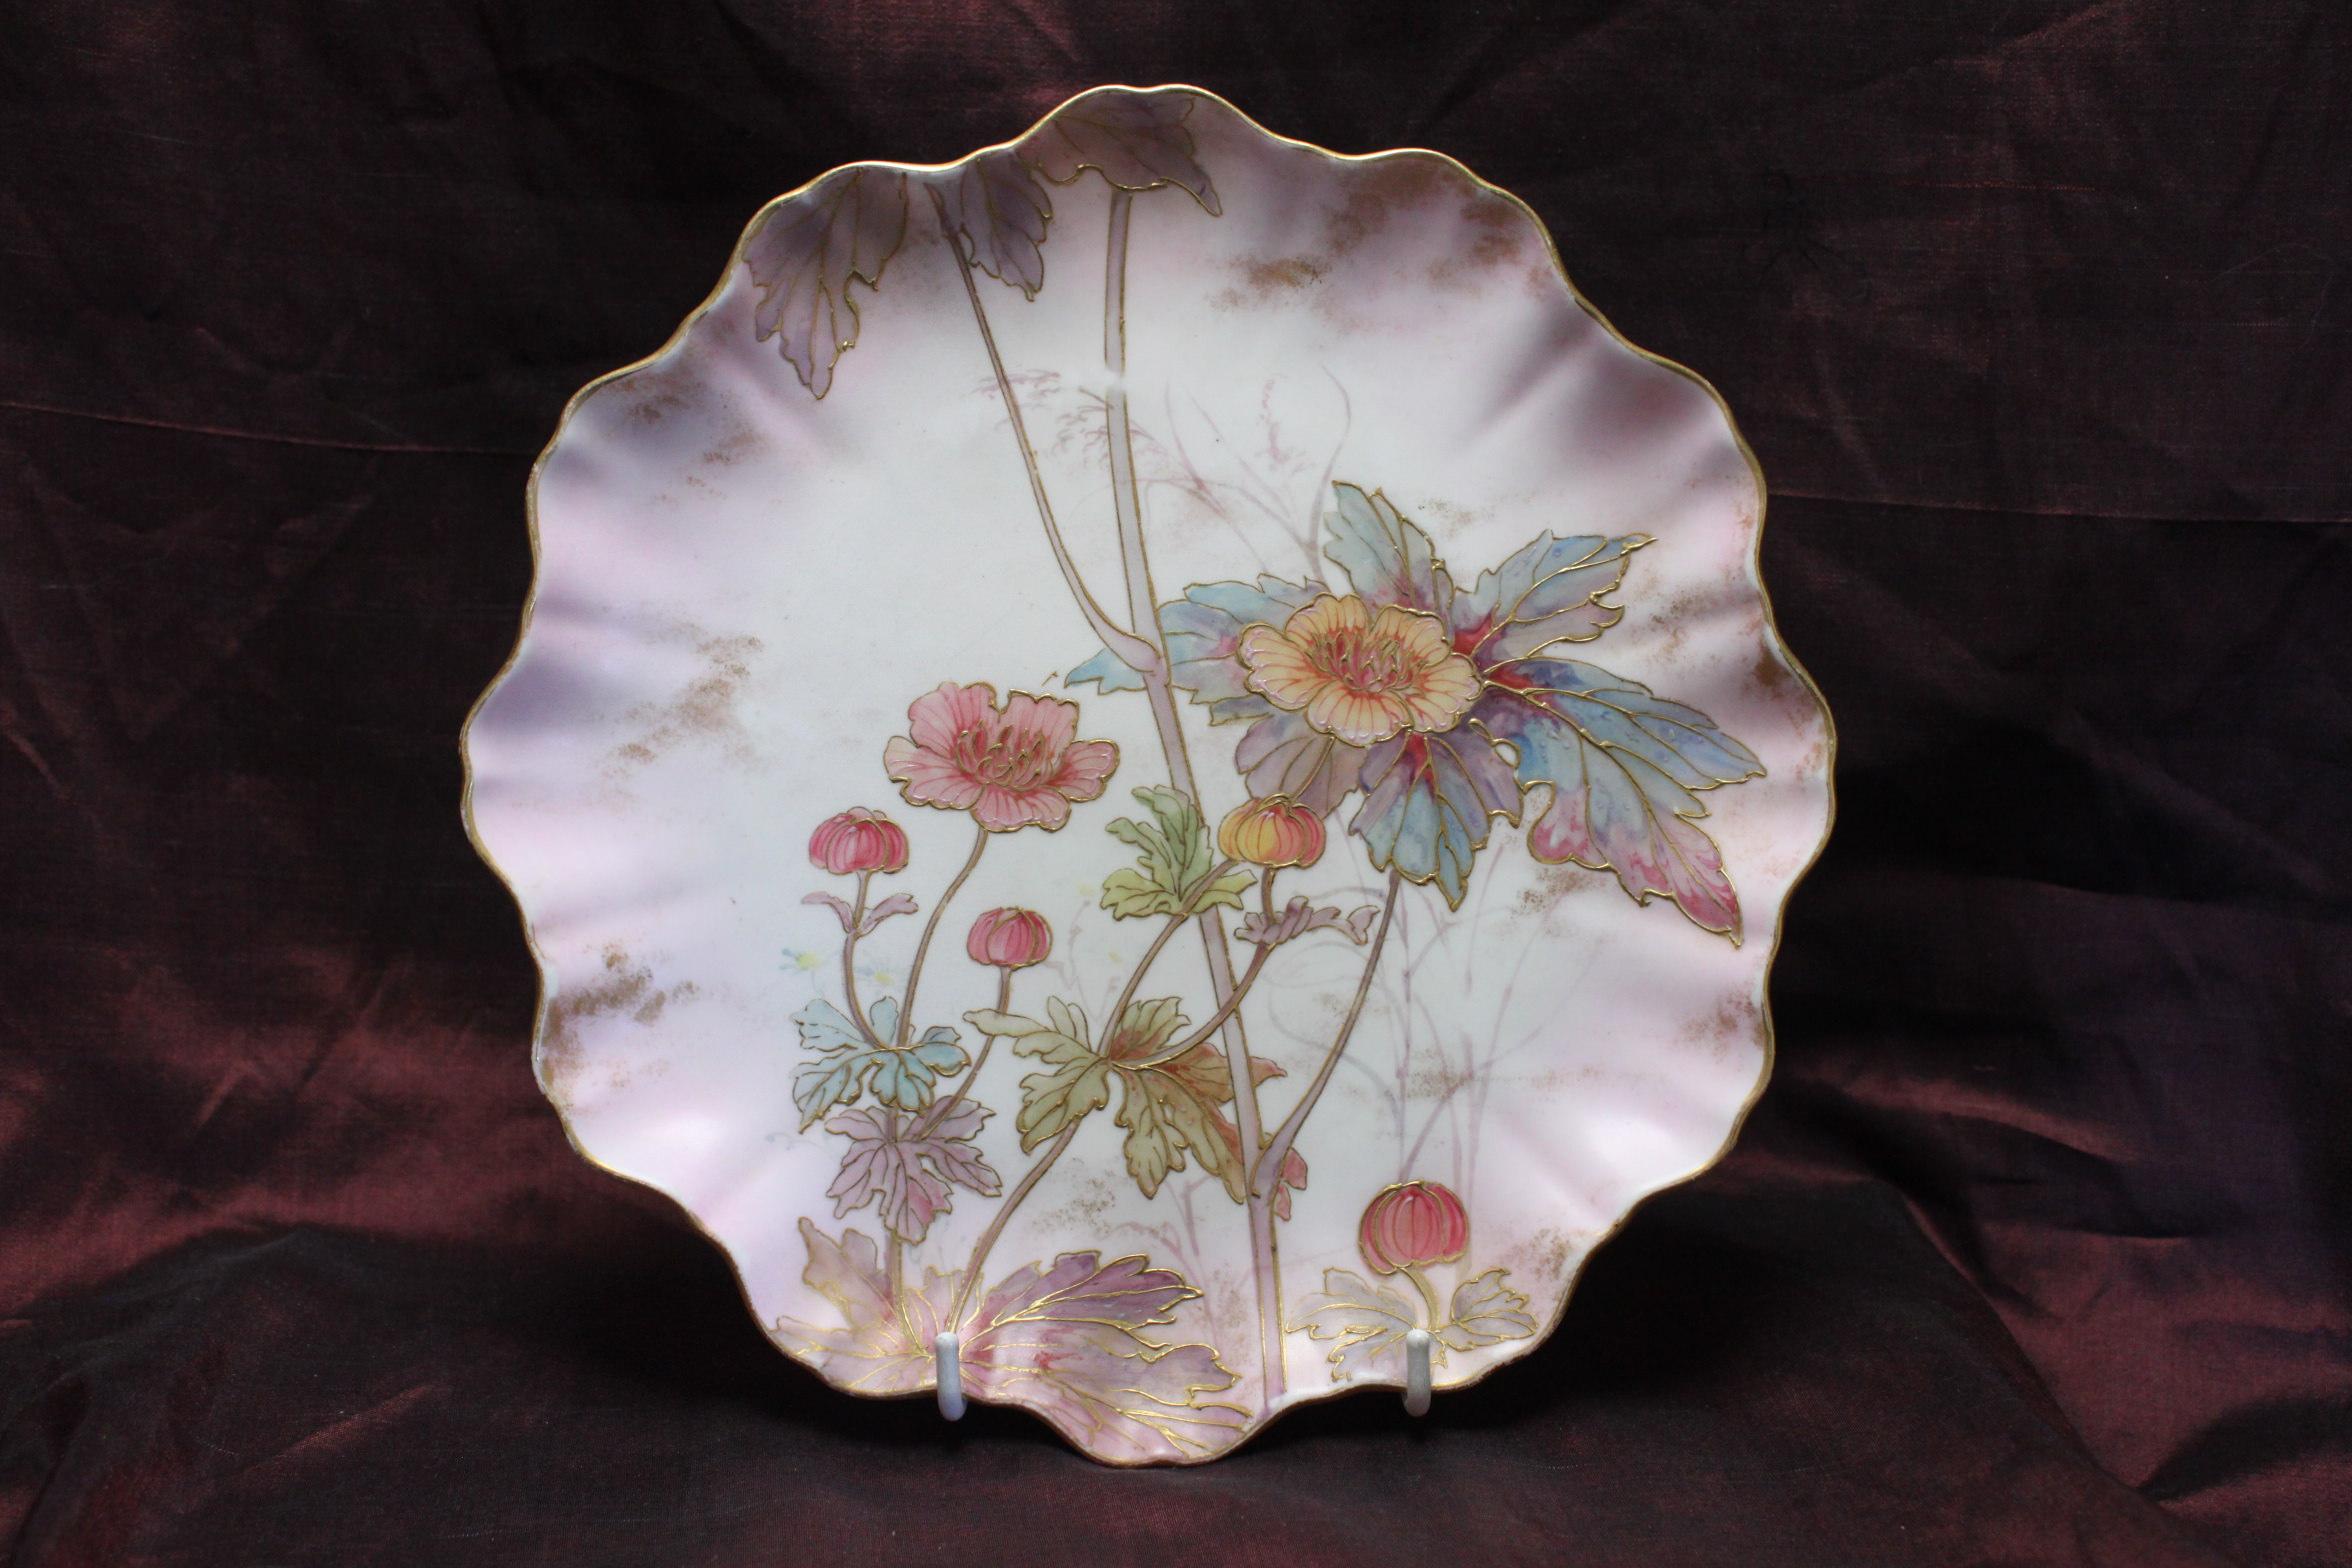 This porcelain plate from Doulton Burslem is from Doulton's 